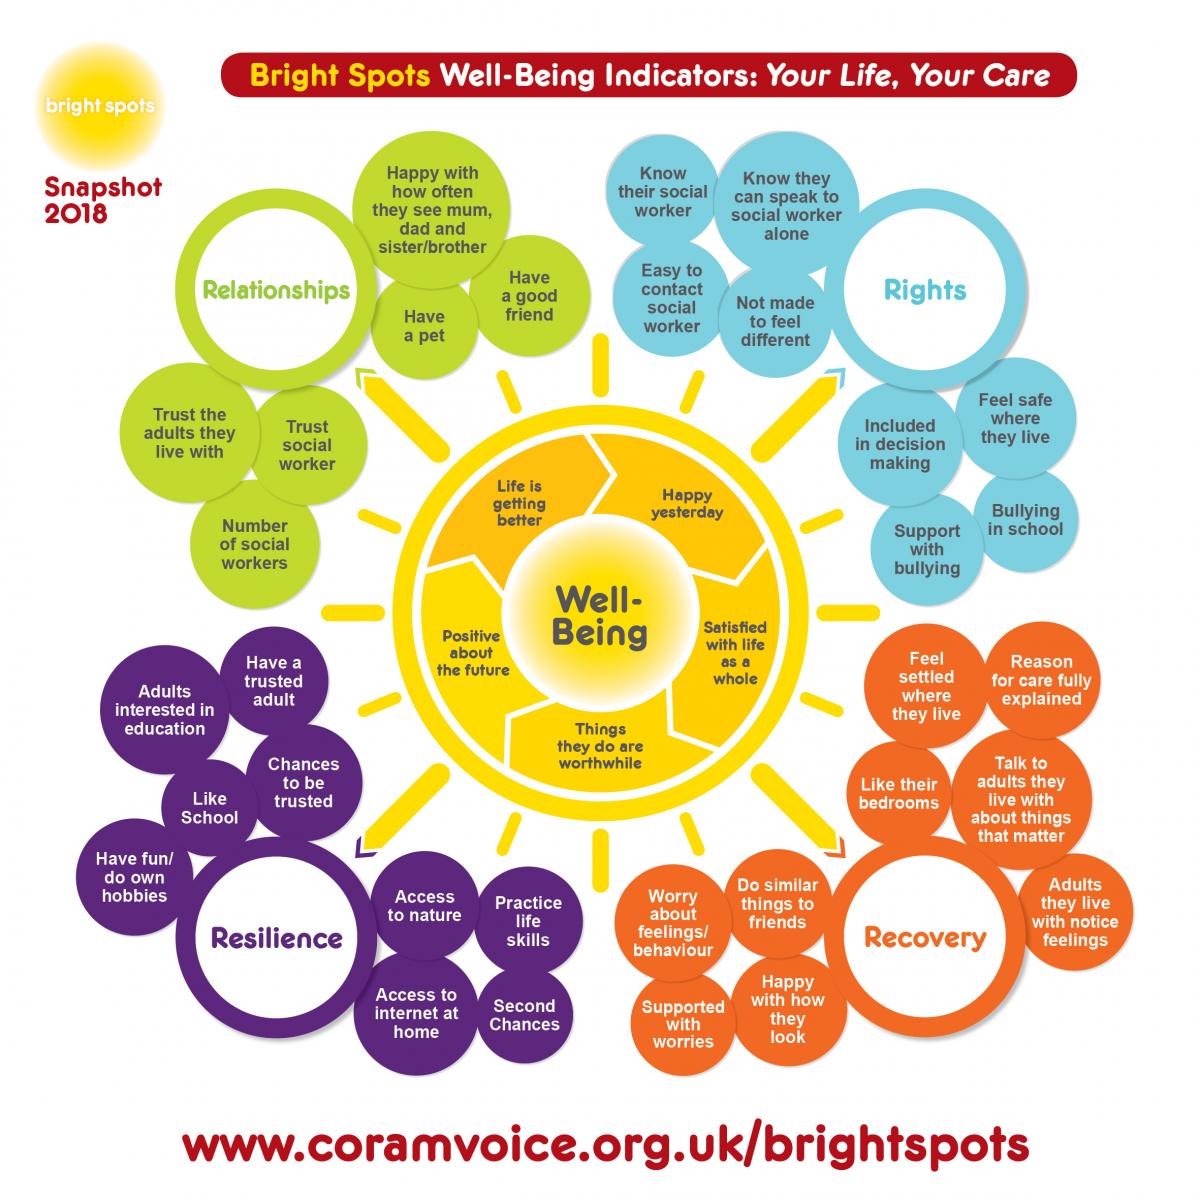 Bright Spots wellbeing indicators